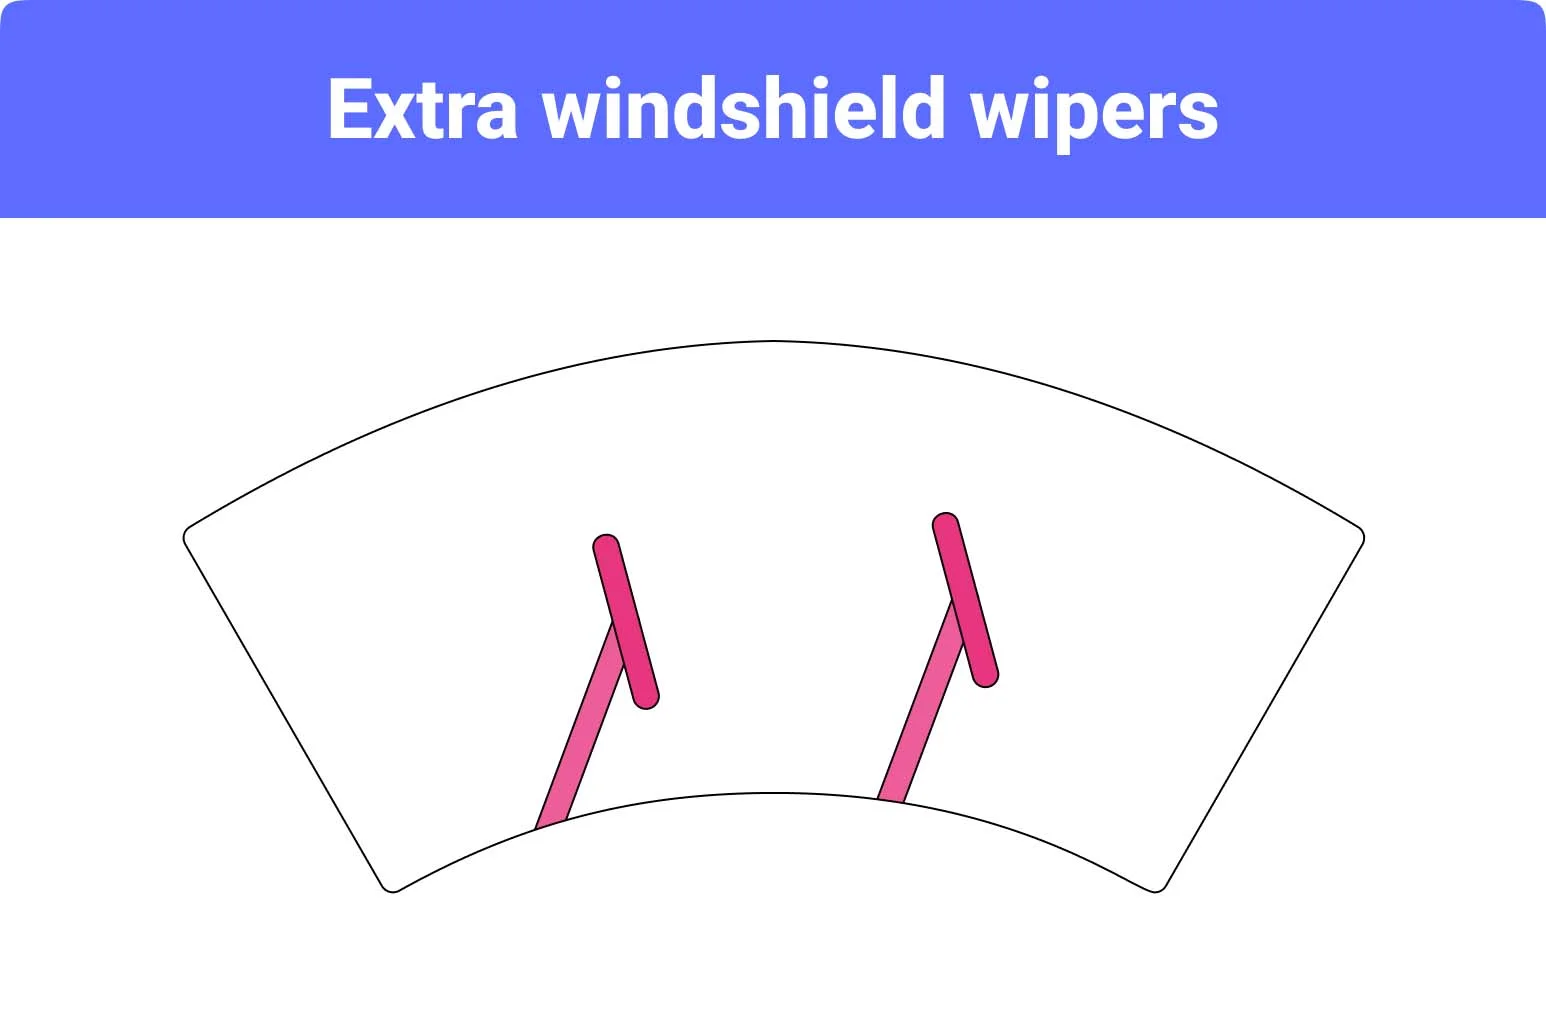 Extra windshield wipers